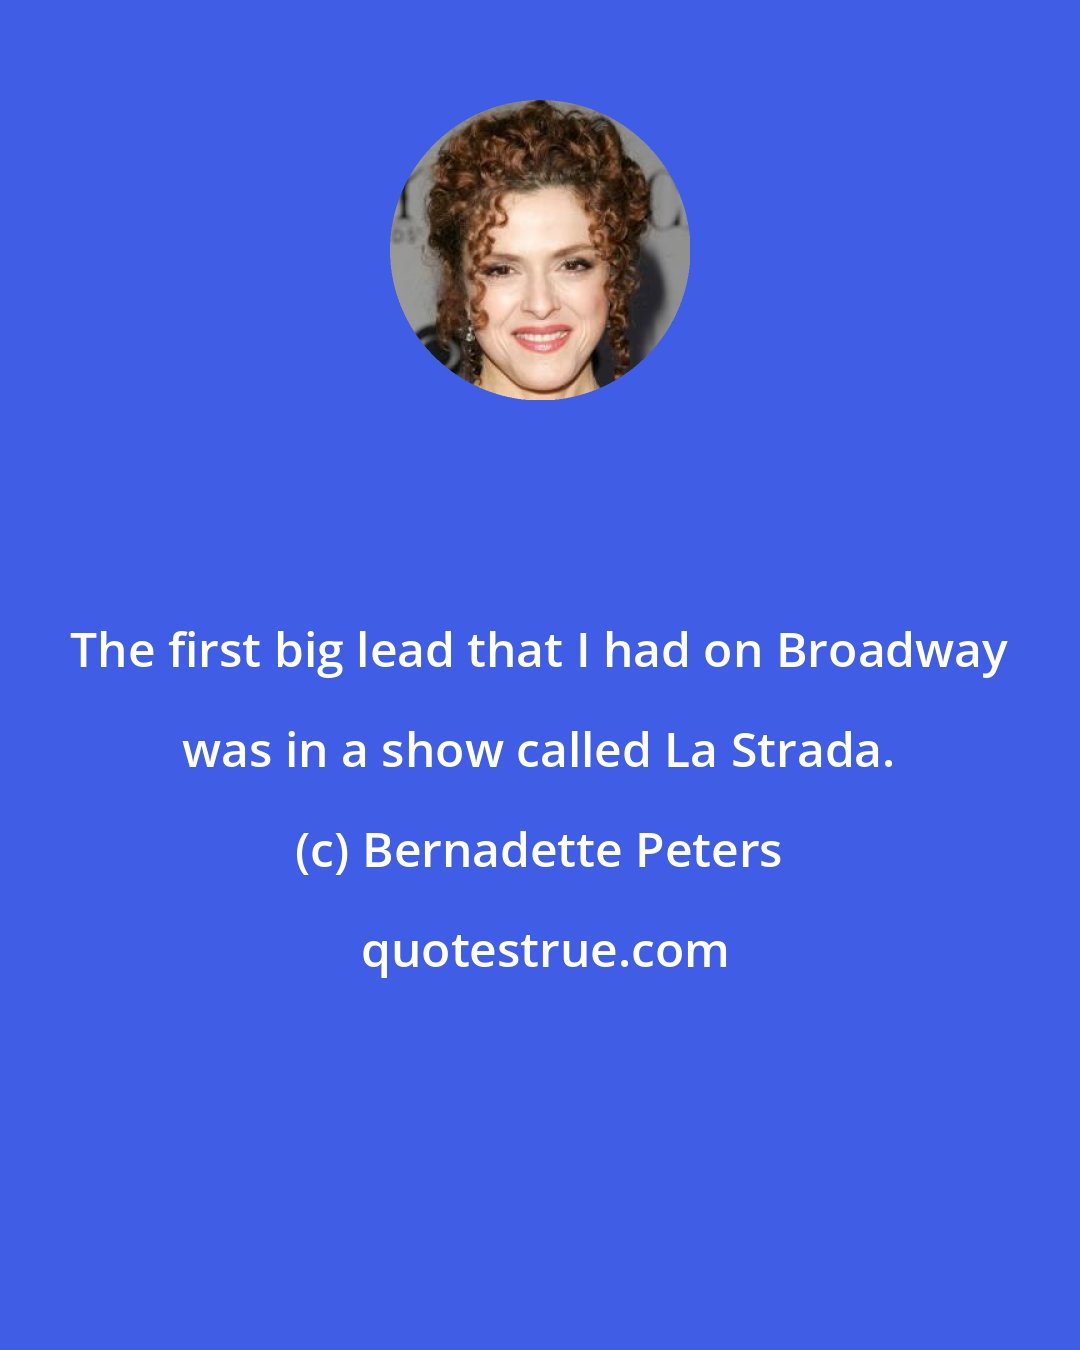 Bernadette Peters: The first big lead that I had on Broadway was in a show called La Strada.